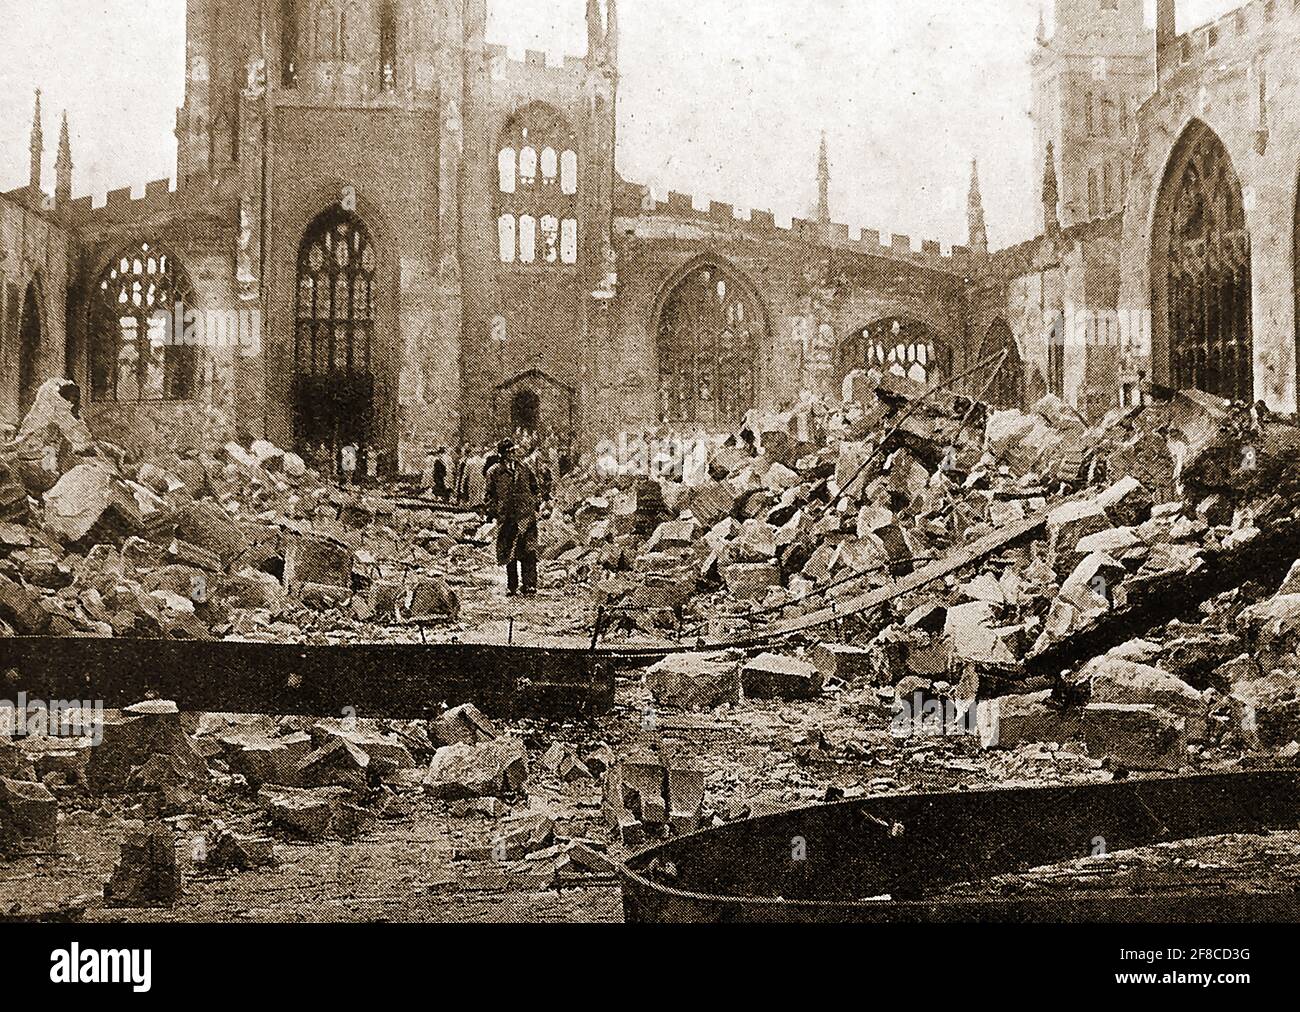 WWII -  A newspaper photo showing the morning after the Destruction of Coventry, England on Nov 14 1940  by German bombers. The Cathedral was reduced to rubble but the font was untouched Stock Photo